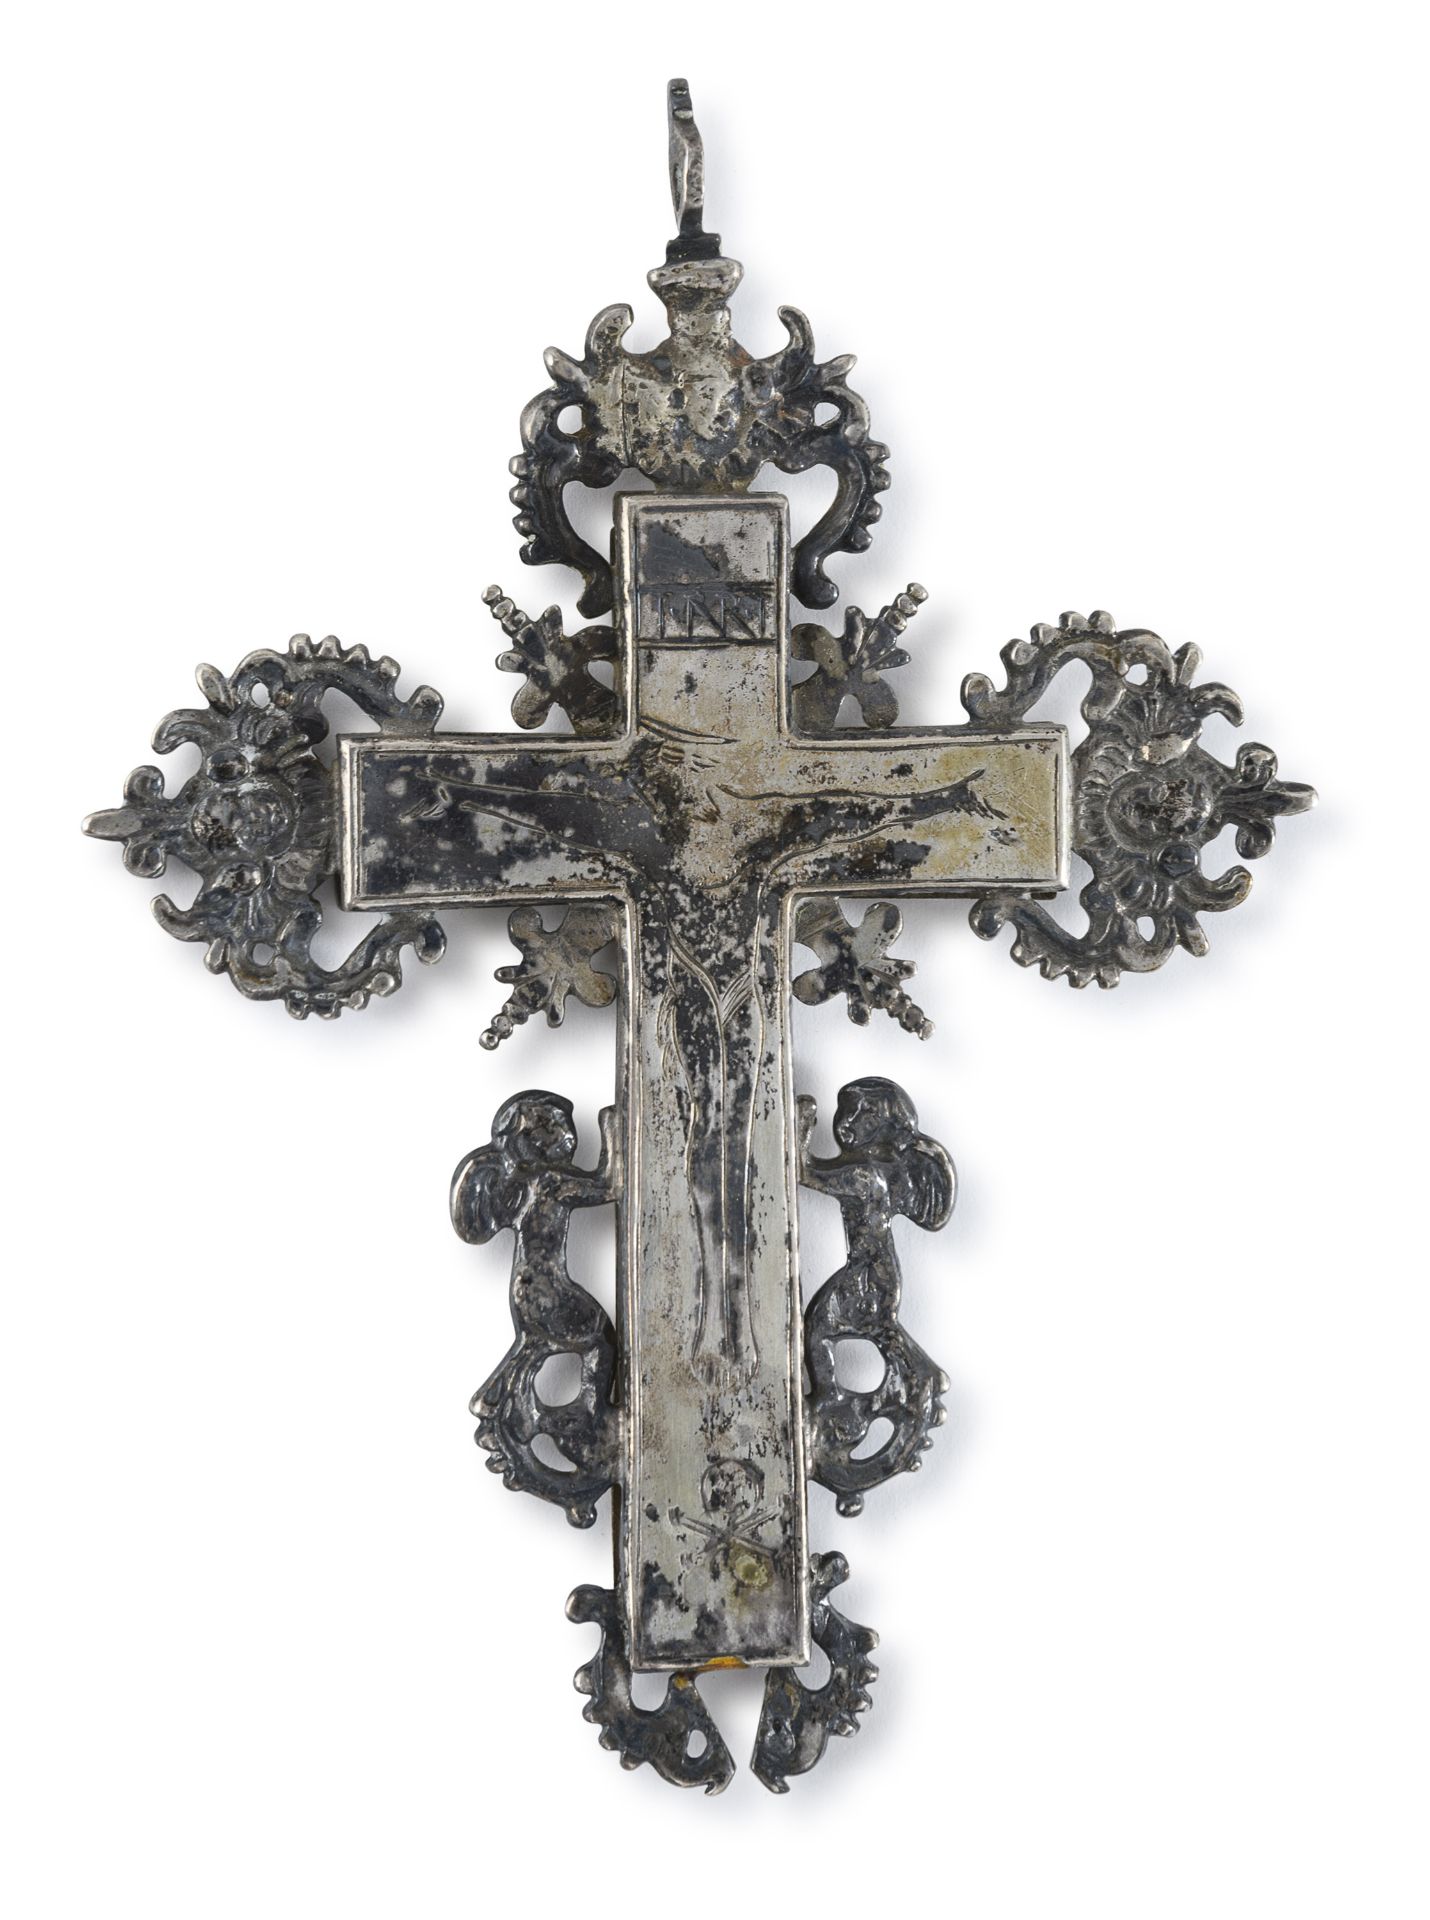 SMALL SILVER-PLATED CRUCIFIX 18th CENTURY